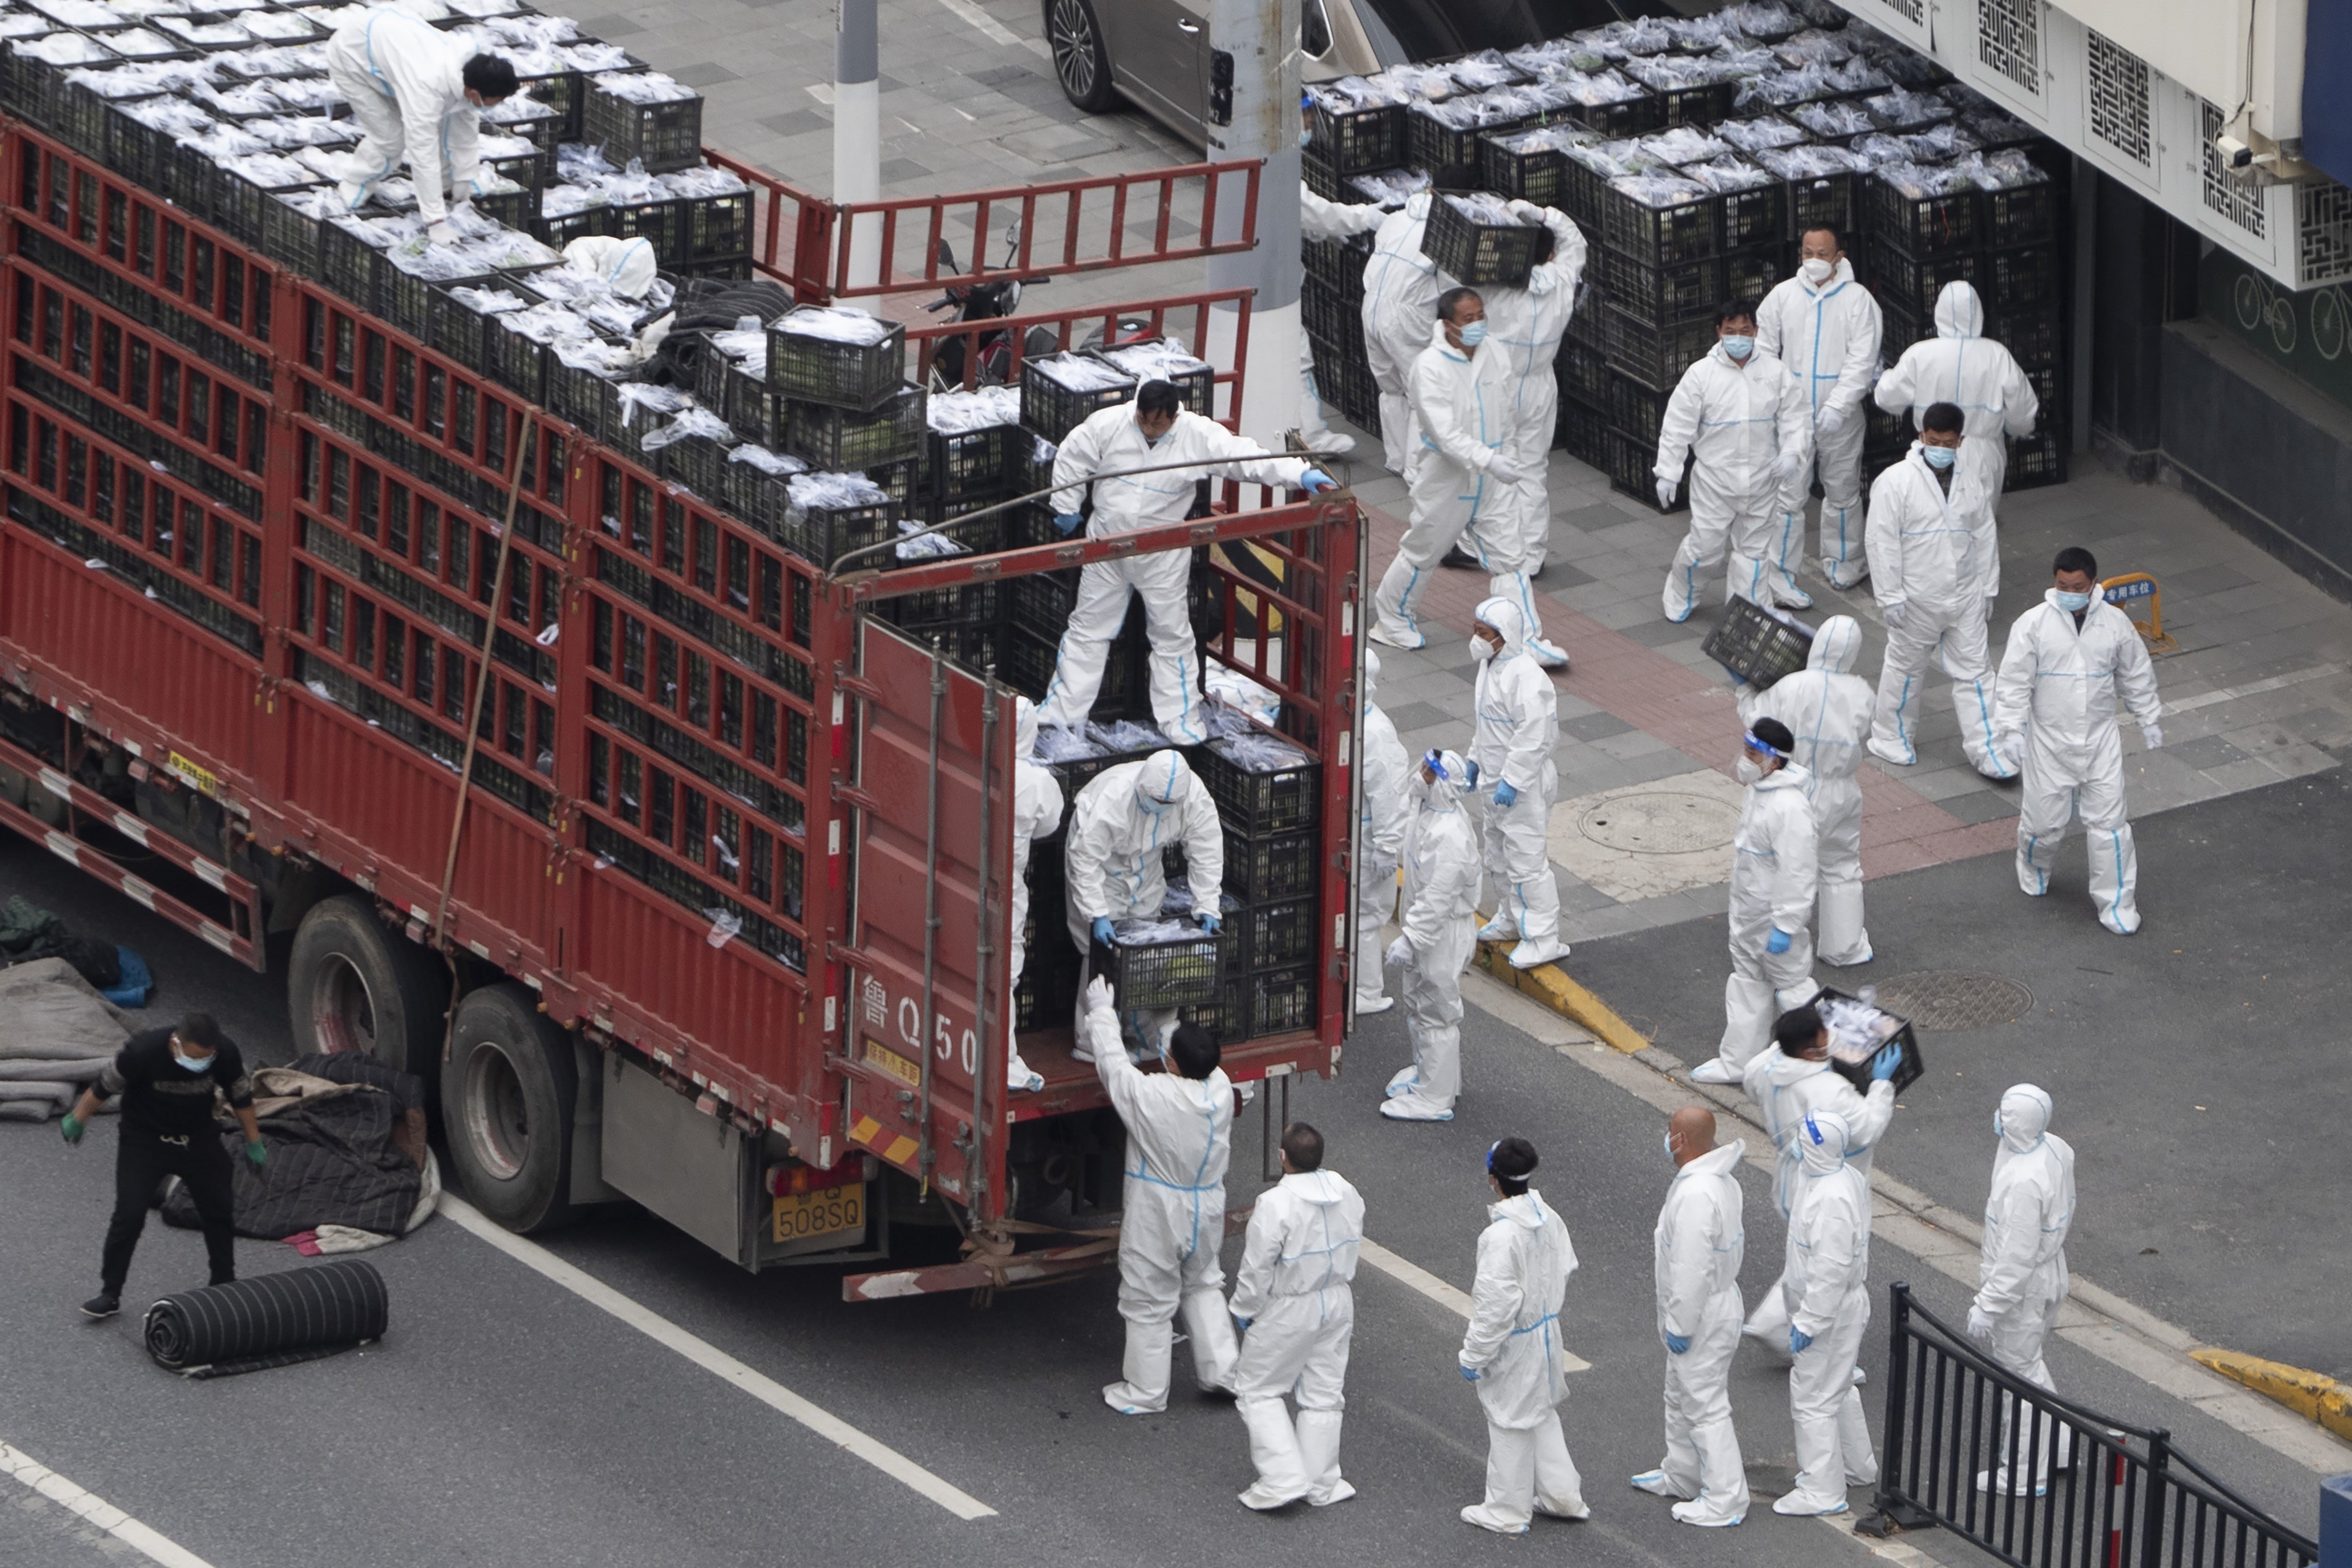 Workers in PPE unload groceries from a truck before distributing them to local residents under the COVID-19 lockdown in Shanghai, China, April 5, 2022. (Photo via AP)